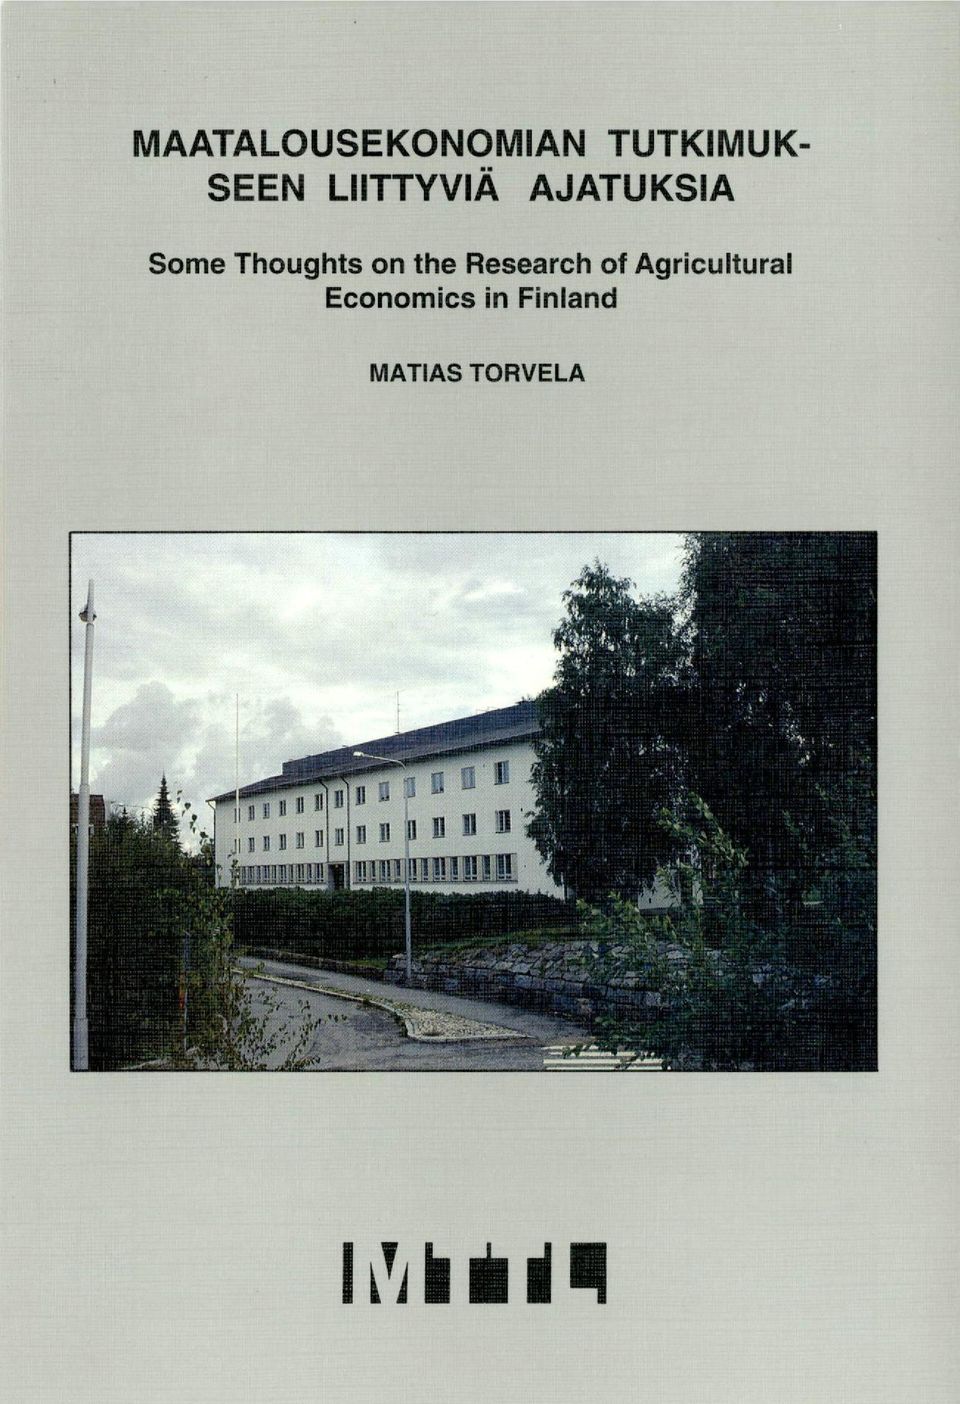 on the Research of Agricultural